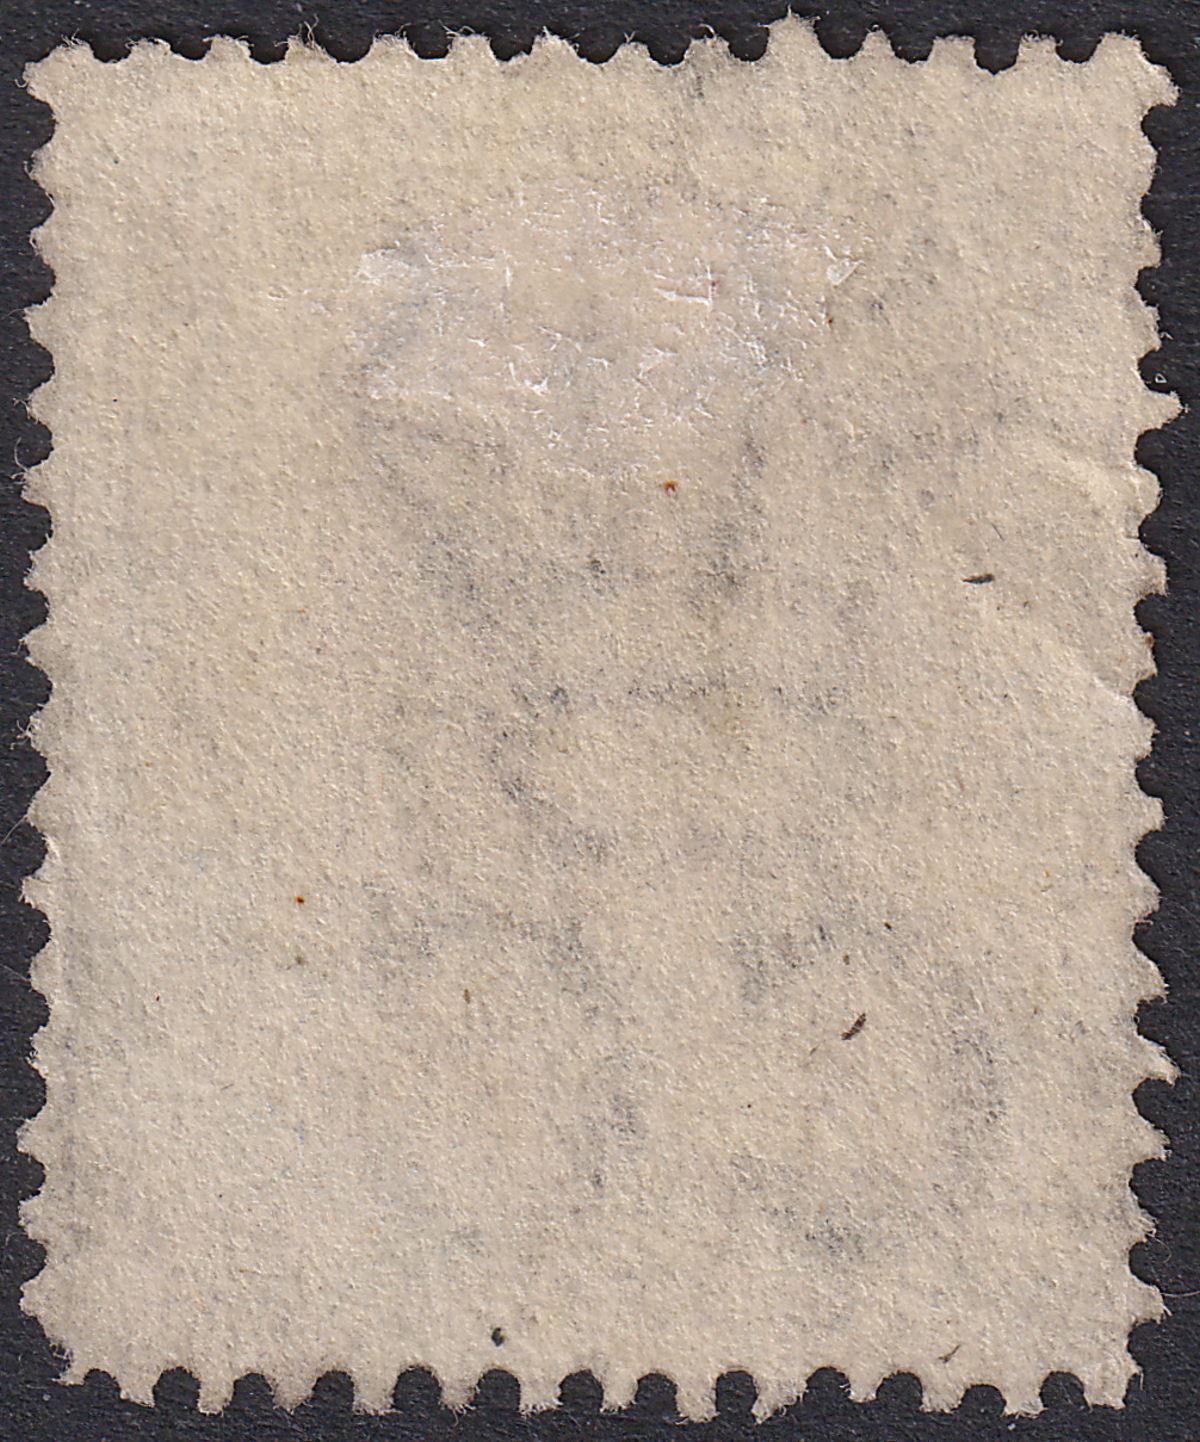 Hong Kong 1877 QV 16c Surch on 18c Used w C1 Canton Postmark SG Z148 cat £300